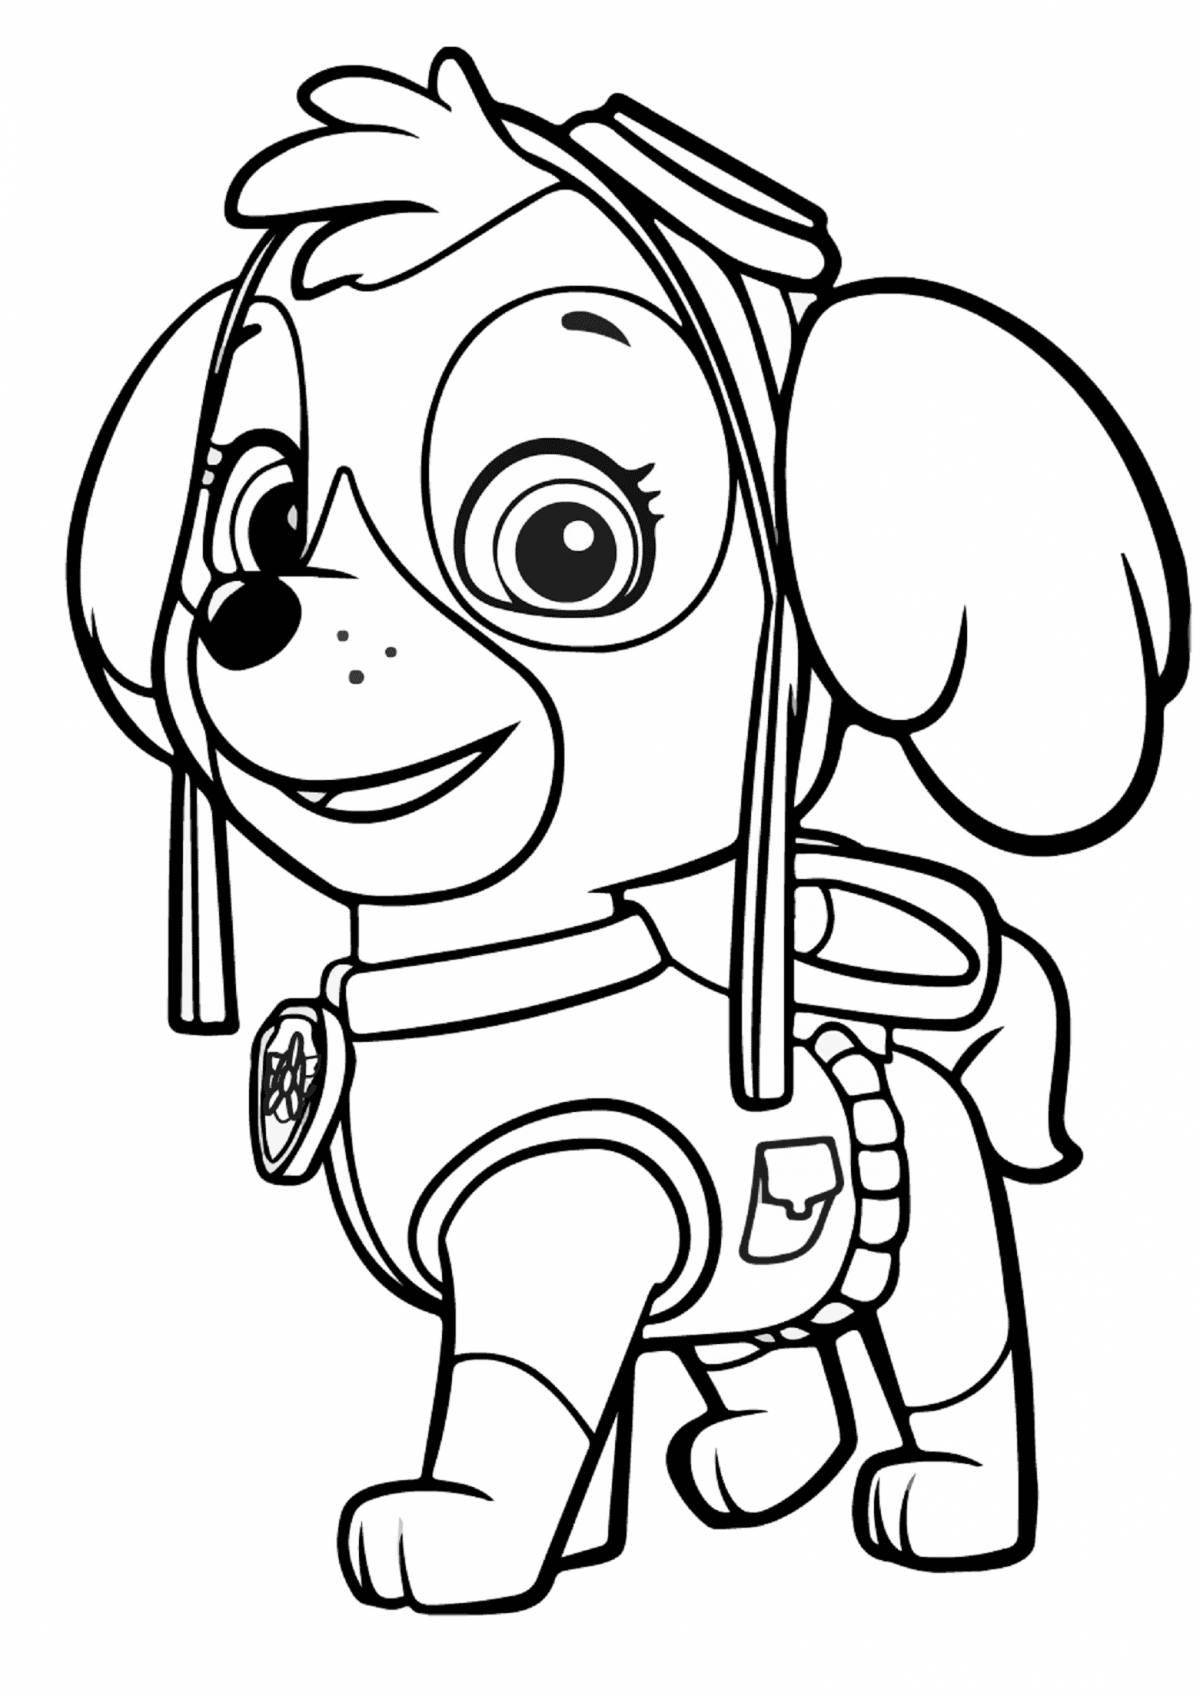 Fabulous cute paw patrol coloring page